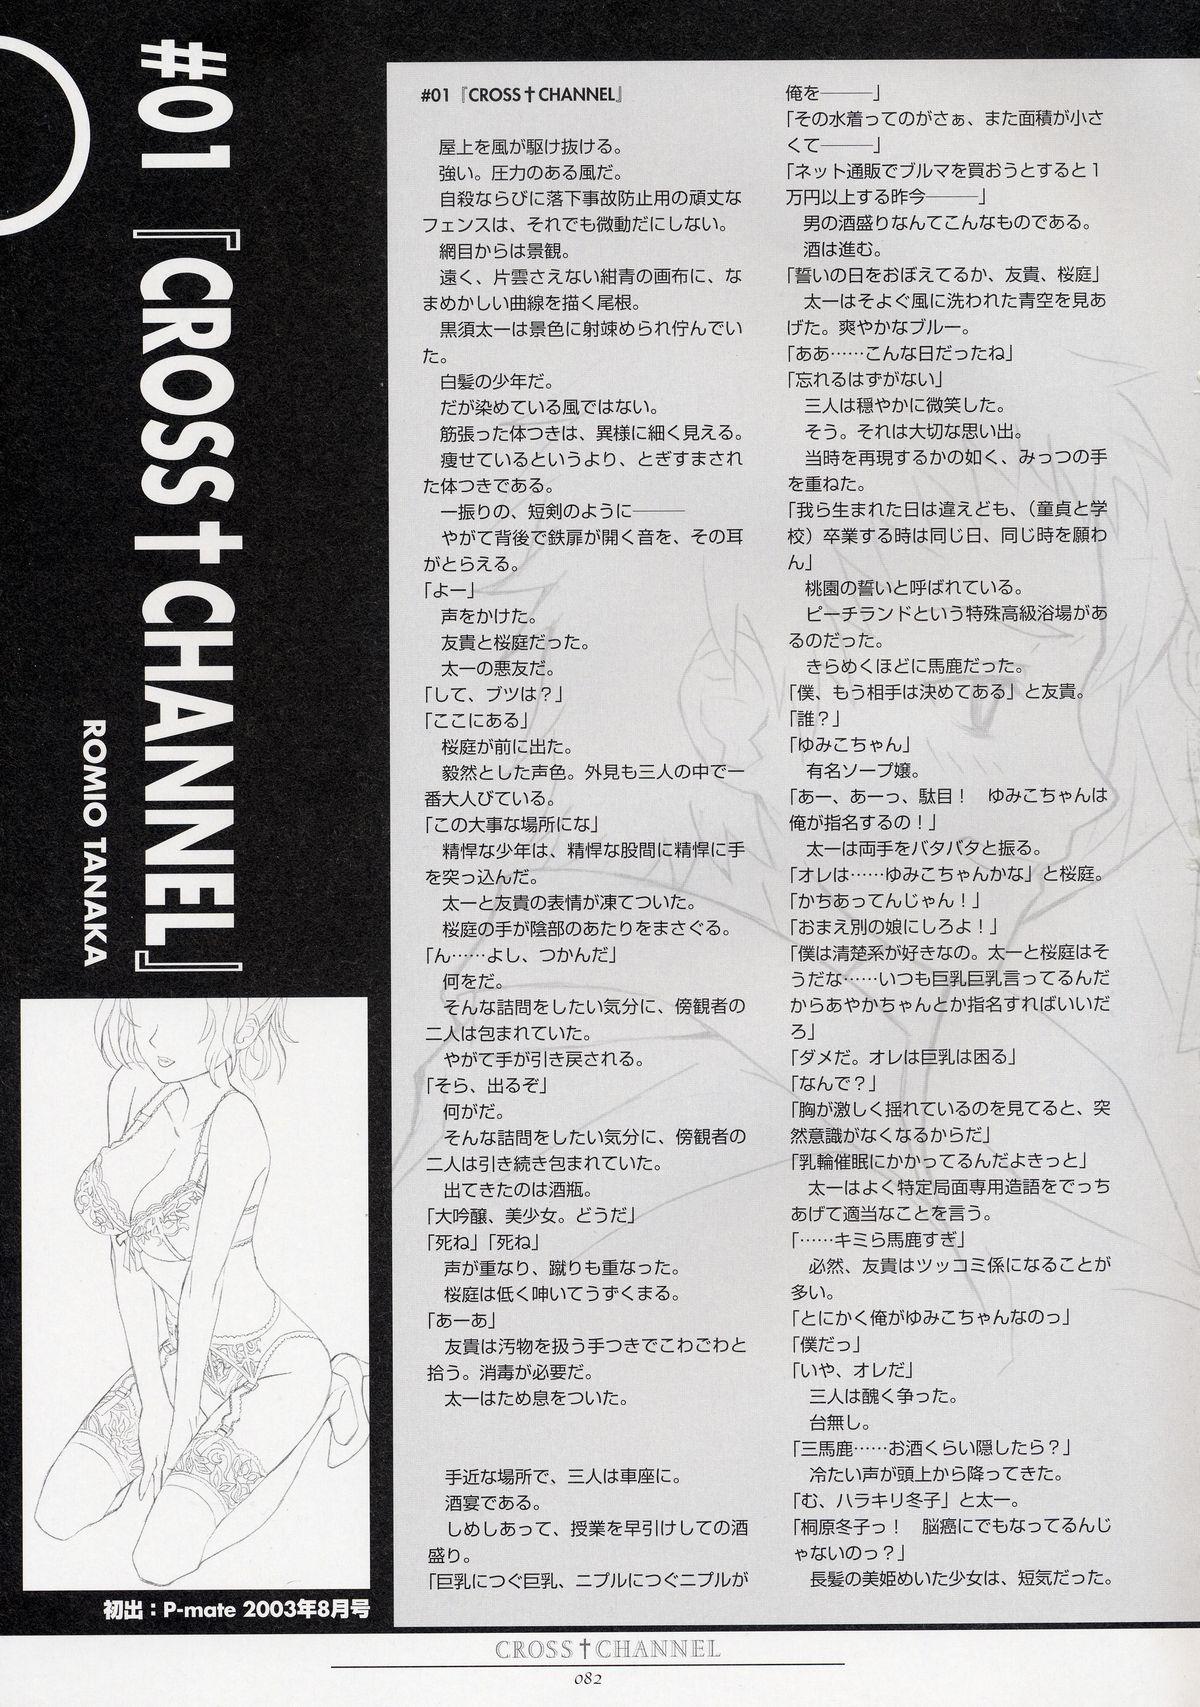 CROSS†CHANNEL Official Setting Materials 92